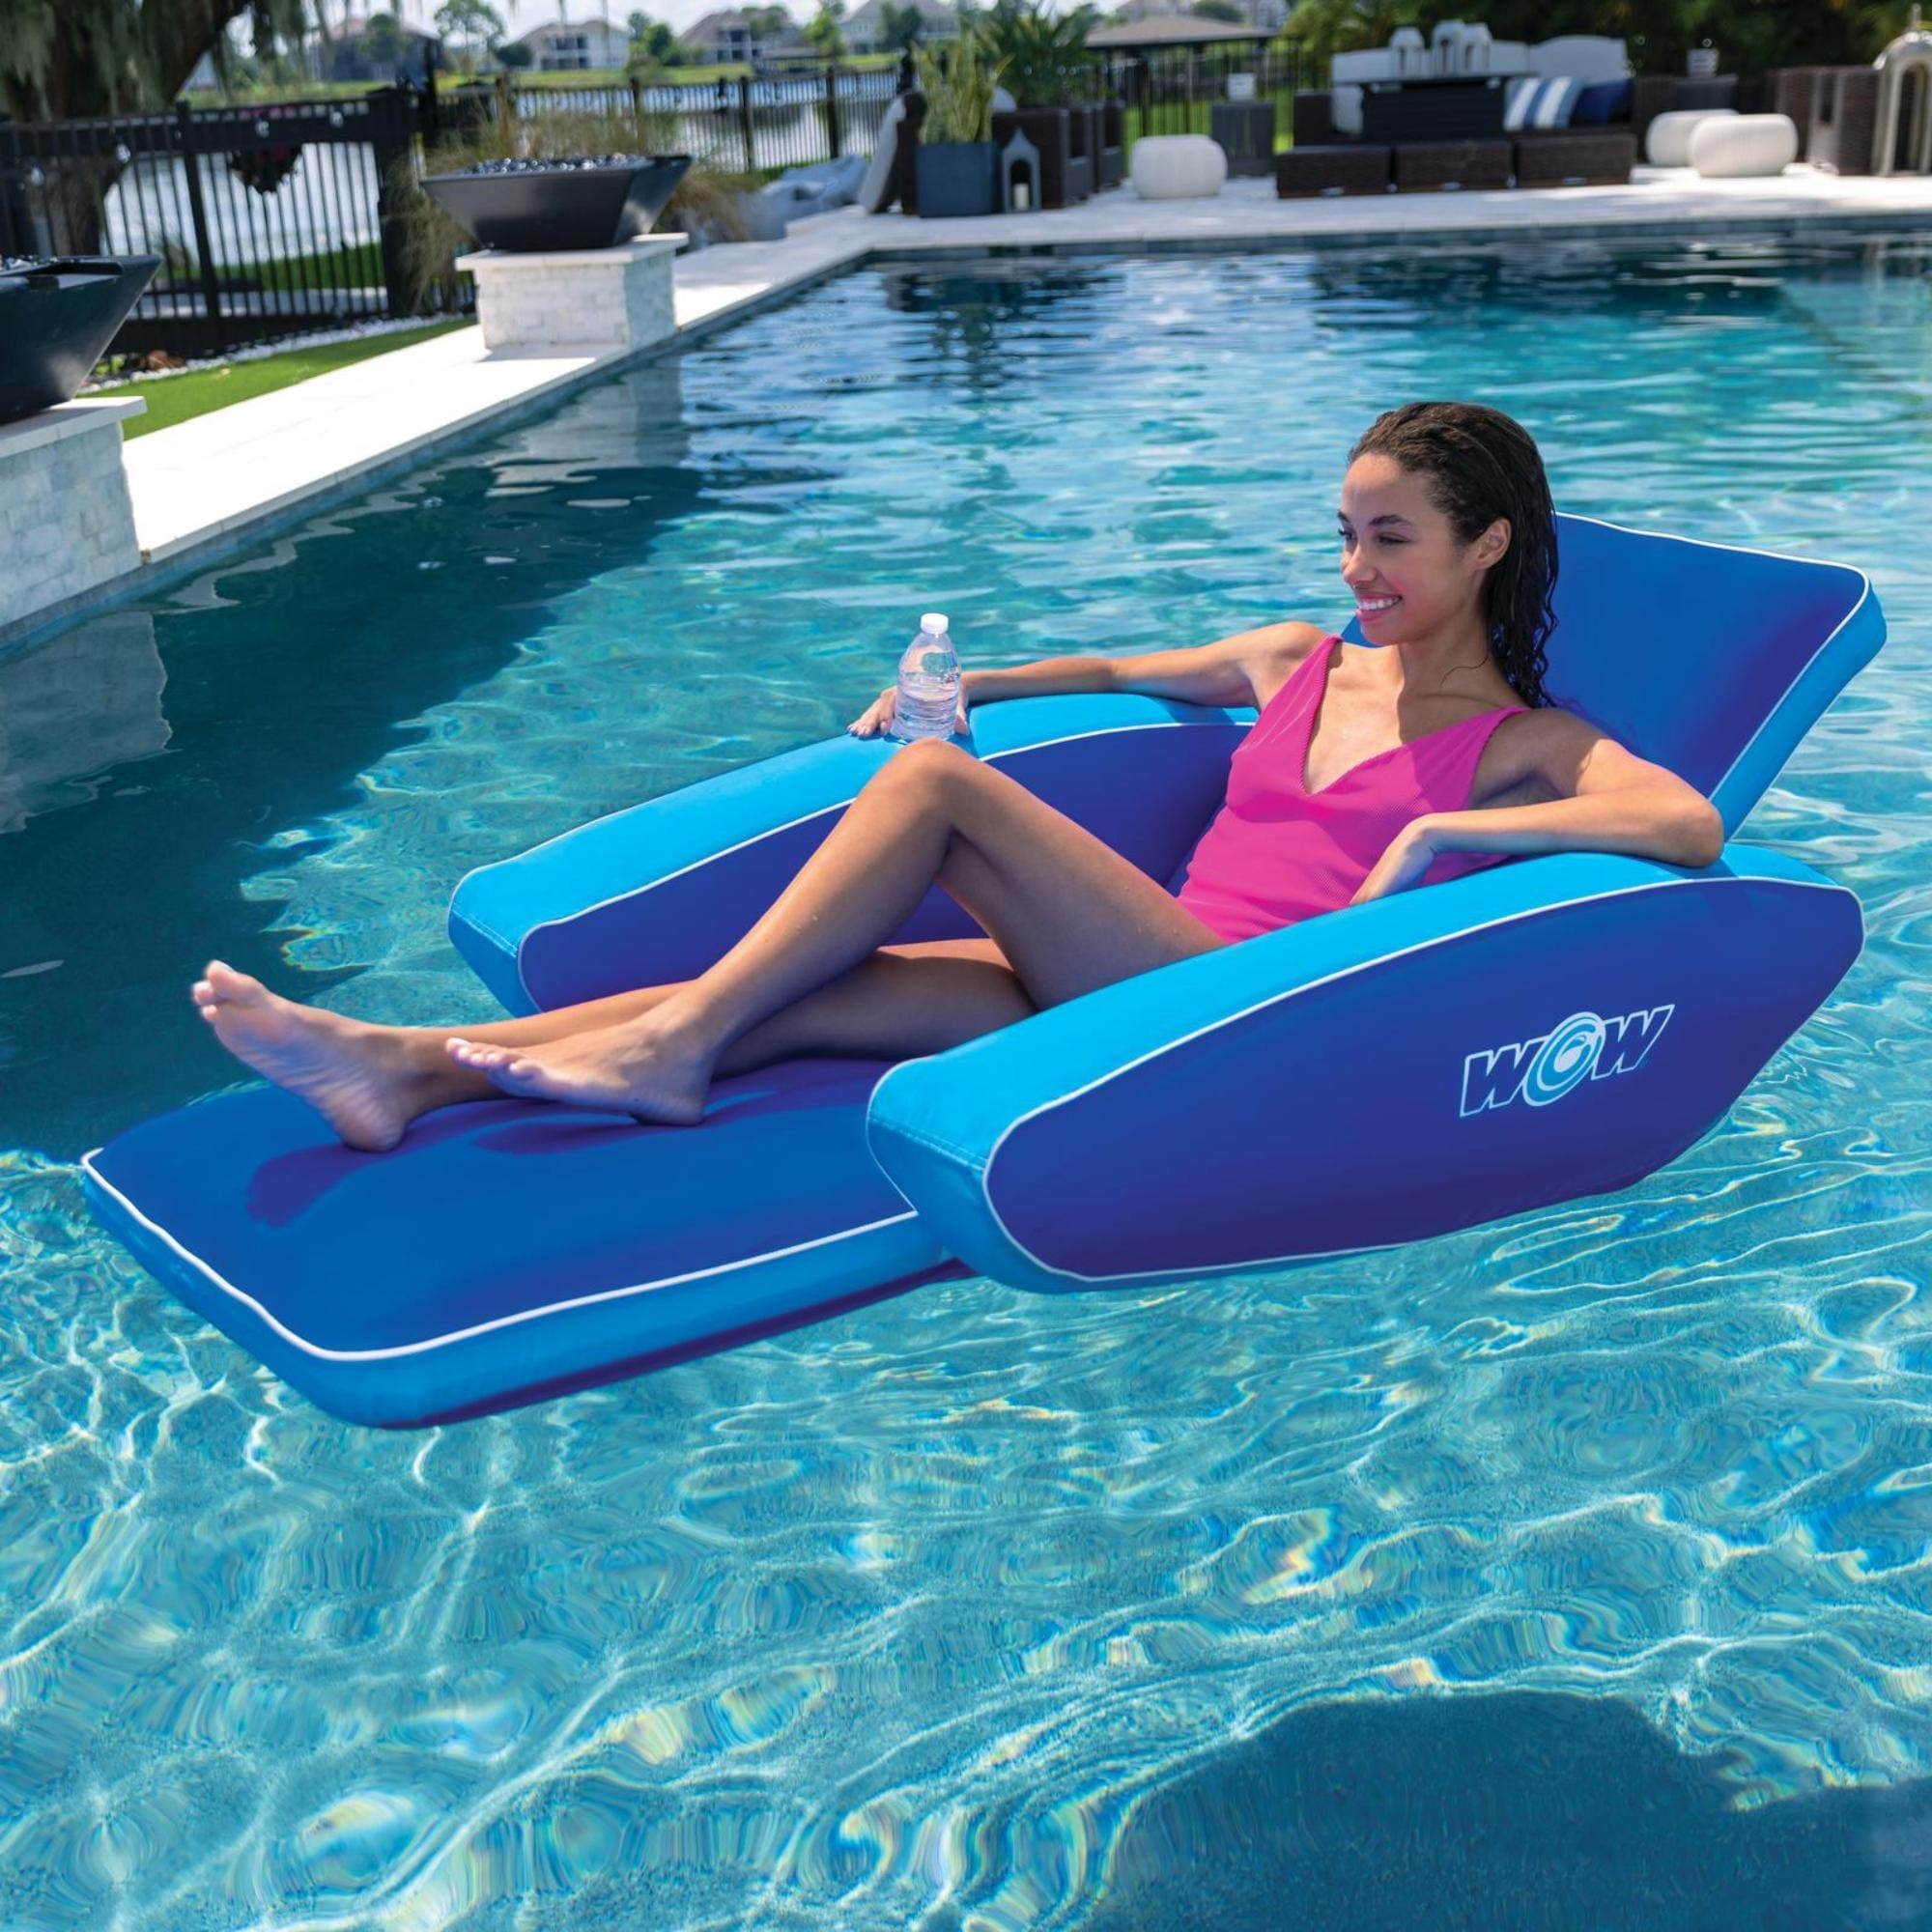 https://ak1.ostkcdn.com/images/products/is/images/direct/1bc343aec44b48a3c4b463201eeea3c587980042/WOW-Sports-Modern-Lounger-Pool-Float-with-Cupholder-%2823-WPF-4542-WOW%29.jpg